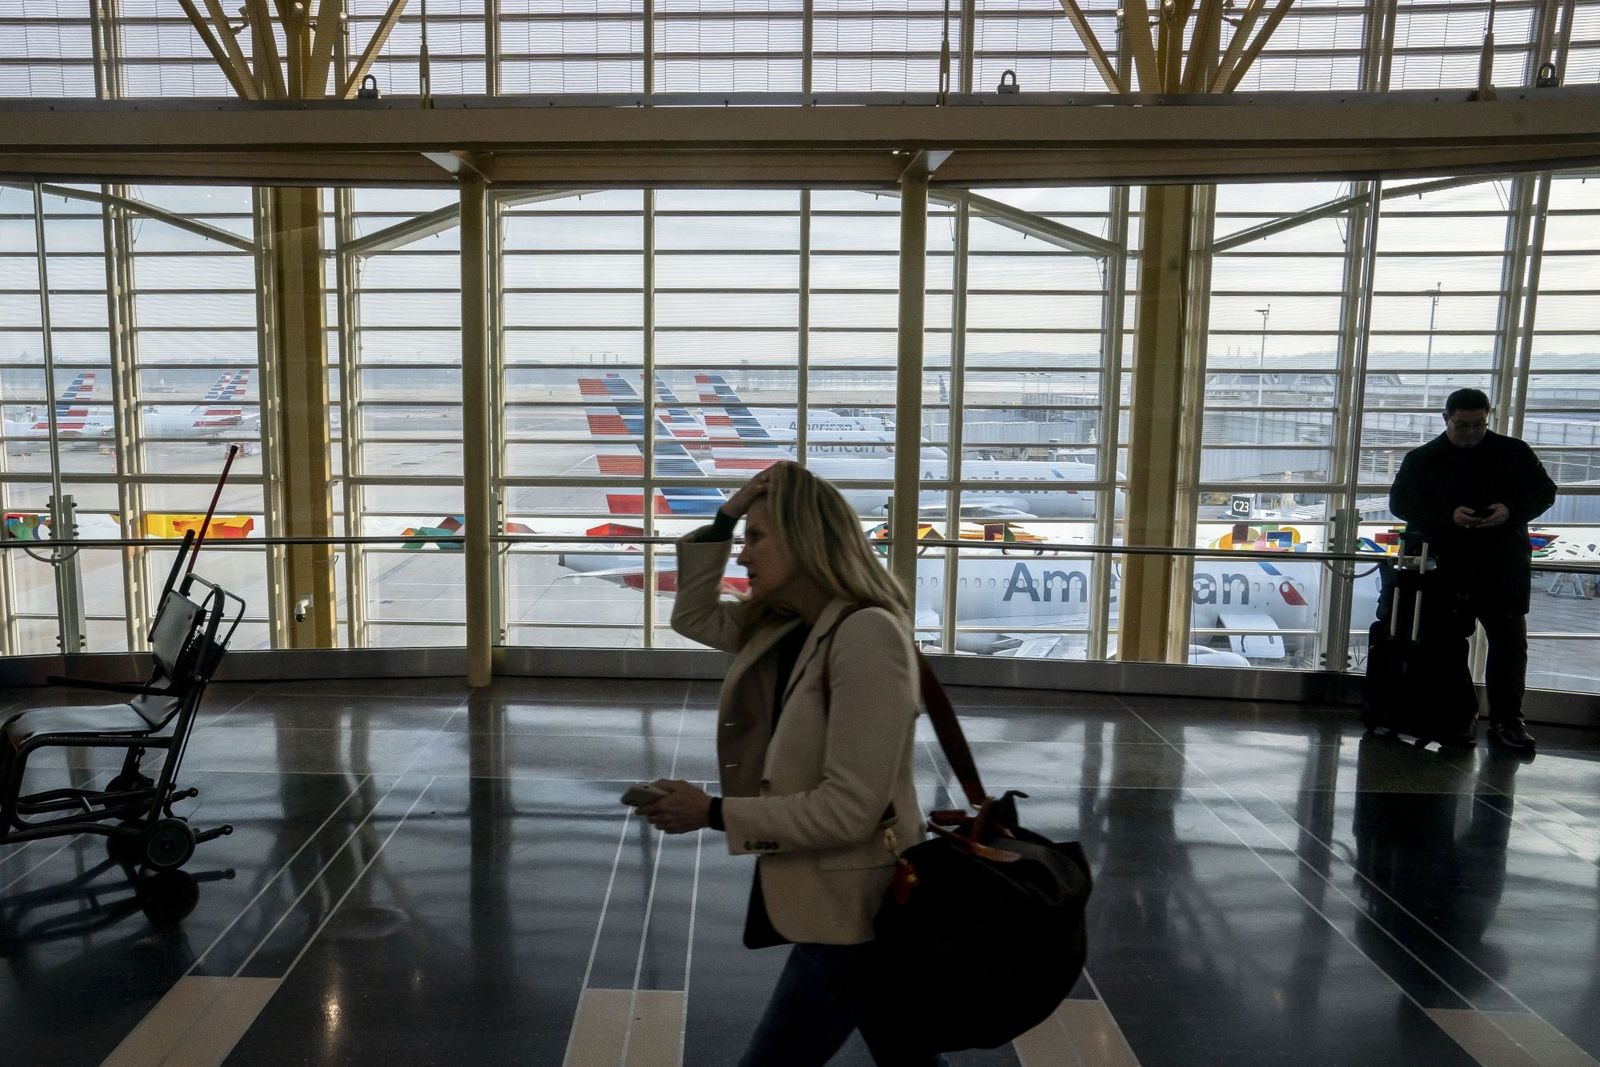 US Halts Flights Nationwide After Key FAA System Goes Down - Bloomberg